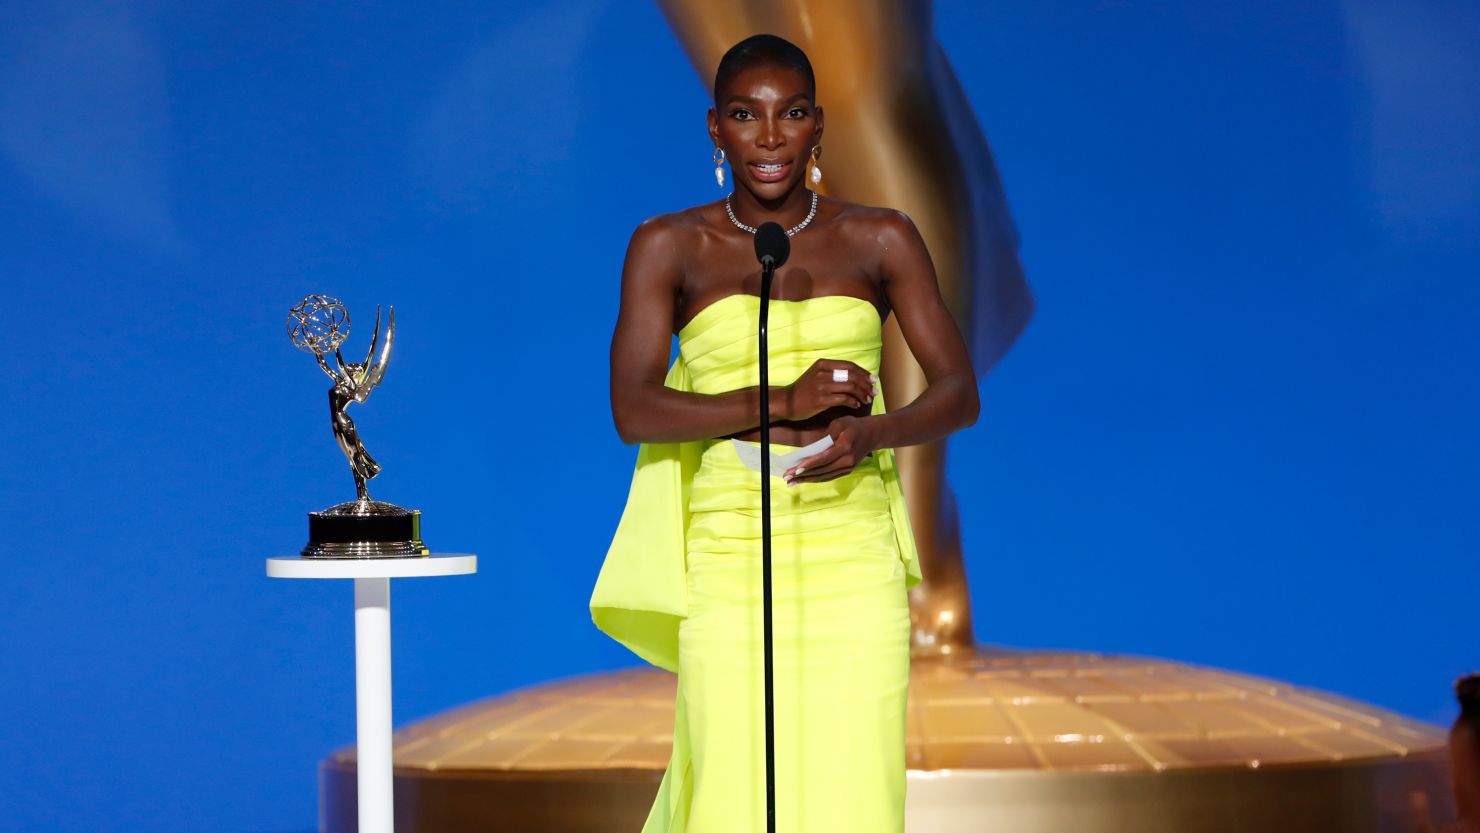 Michaela Coel from 'I May Destroy You' speaks at the 73rd Emmy Awards broadcast on Sunday, Sept. 19